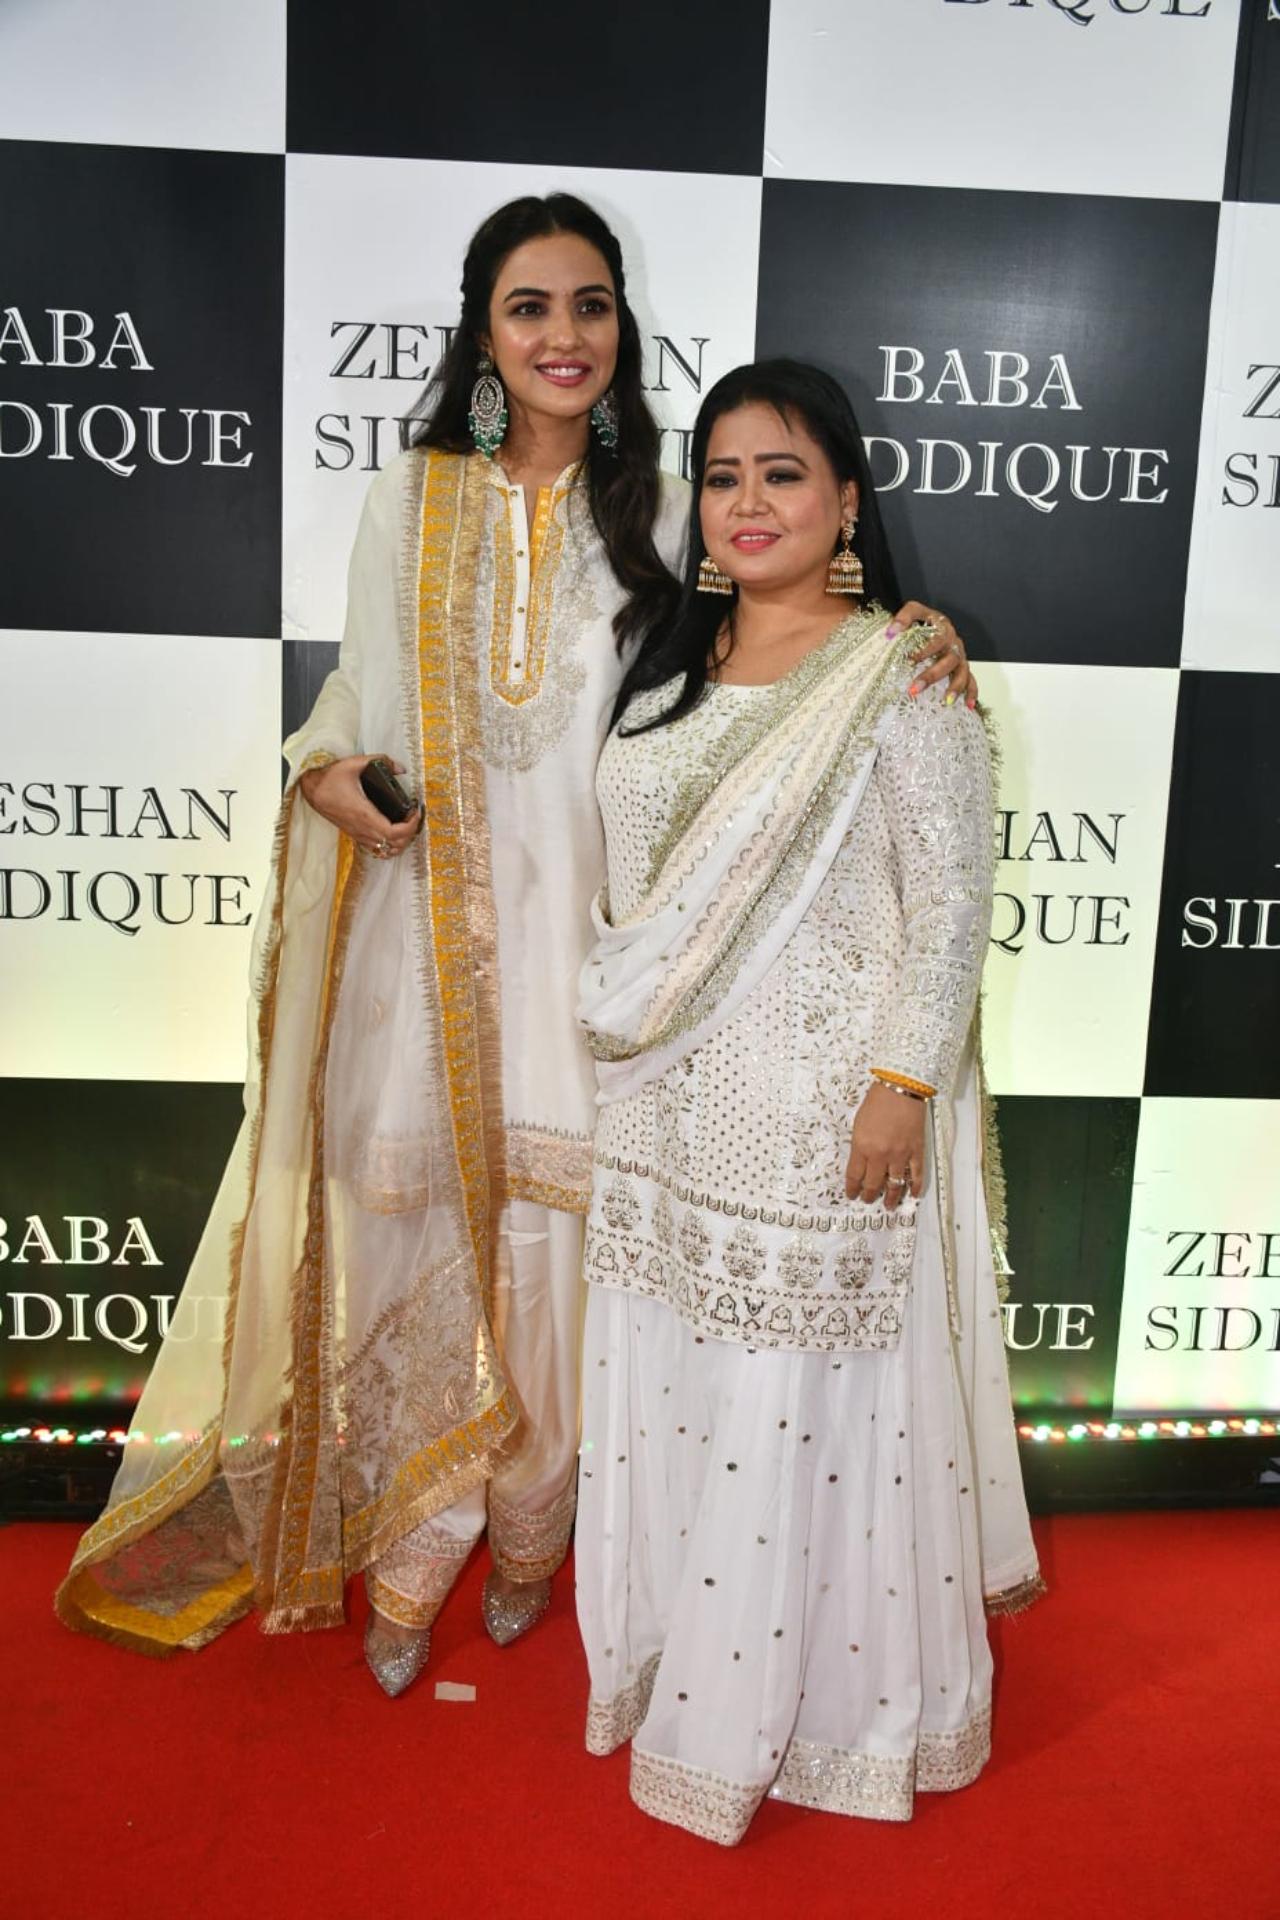 Bharti Singh and Jasmin Bhasin posed together before entering the venue